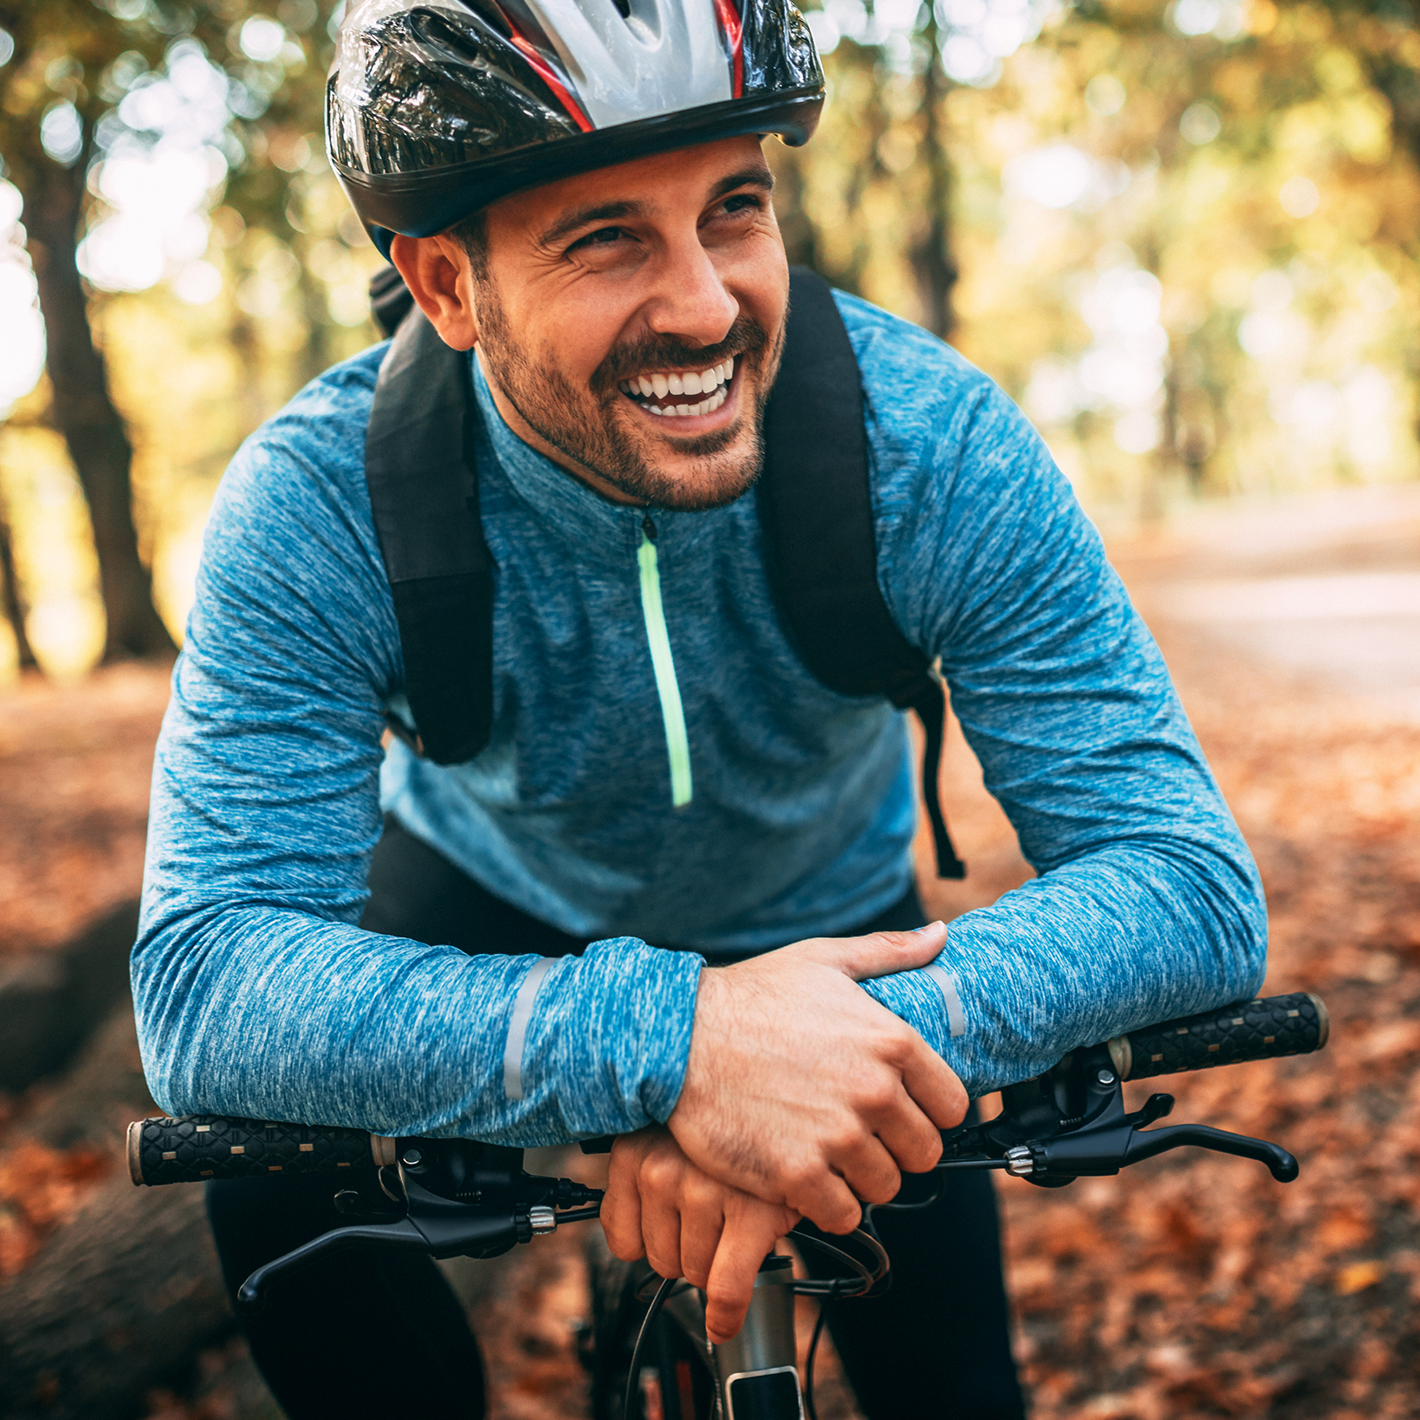 Man smiling, while resting his arms on his mountain bike out in nature.
